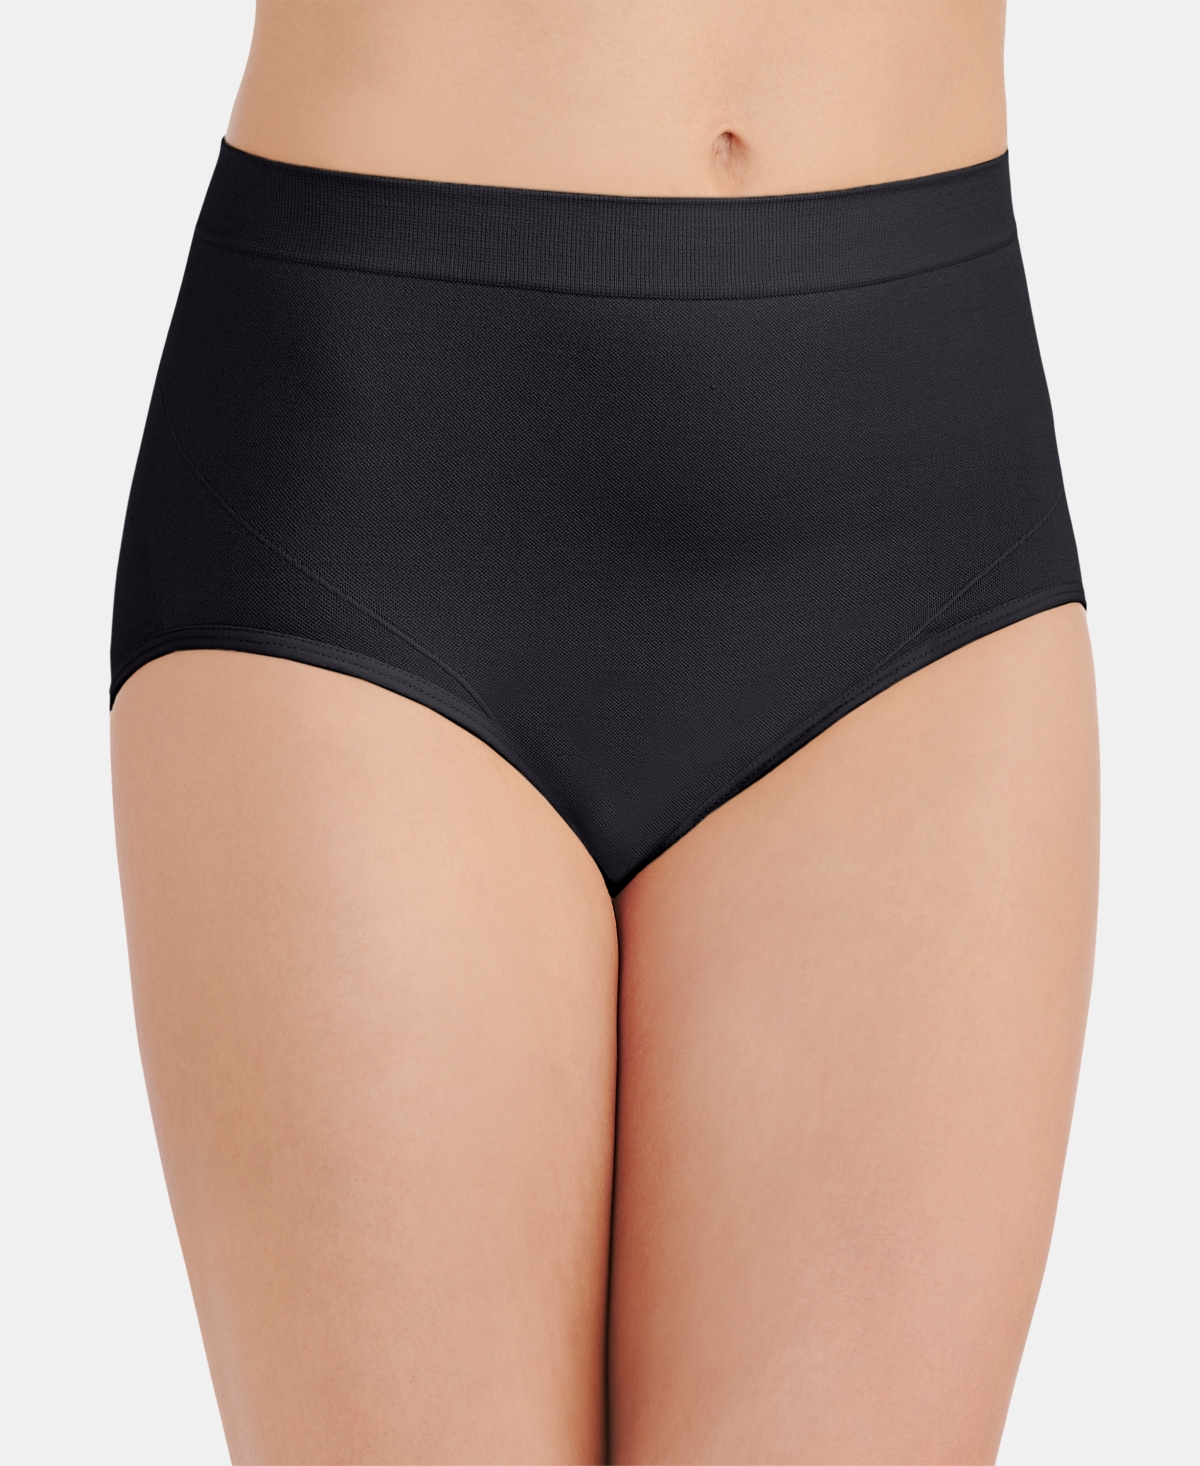 Seamless Smoothing Comfort Brief Underwear 13264, also available in extended sizes - Sheer Quartz